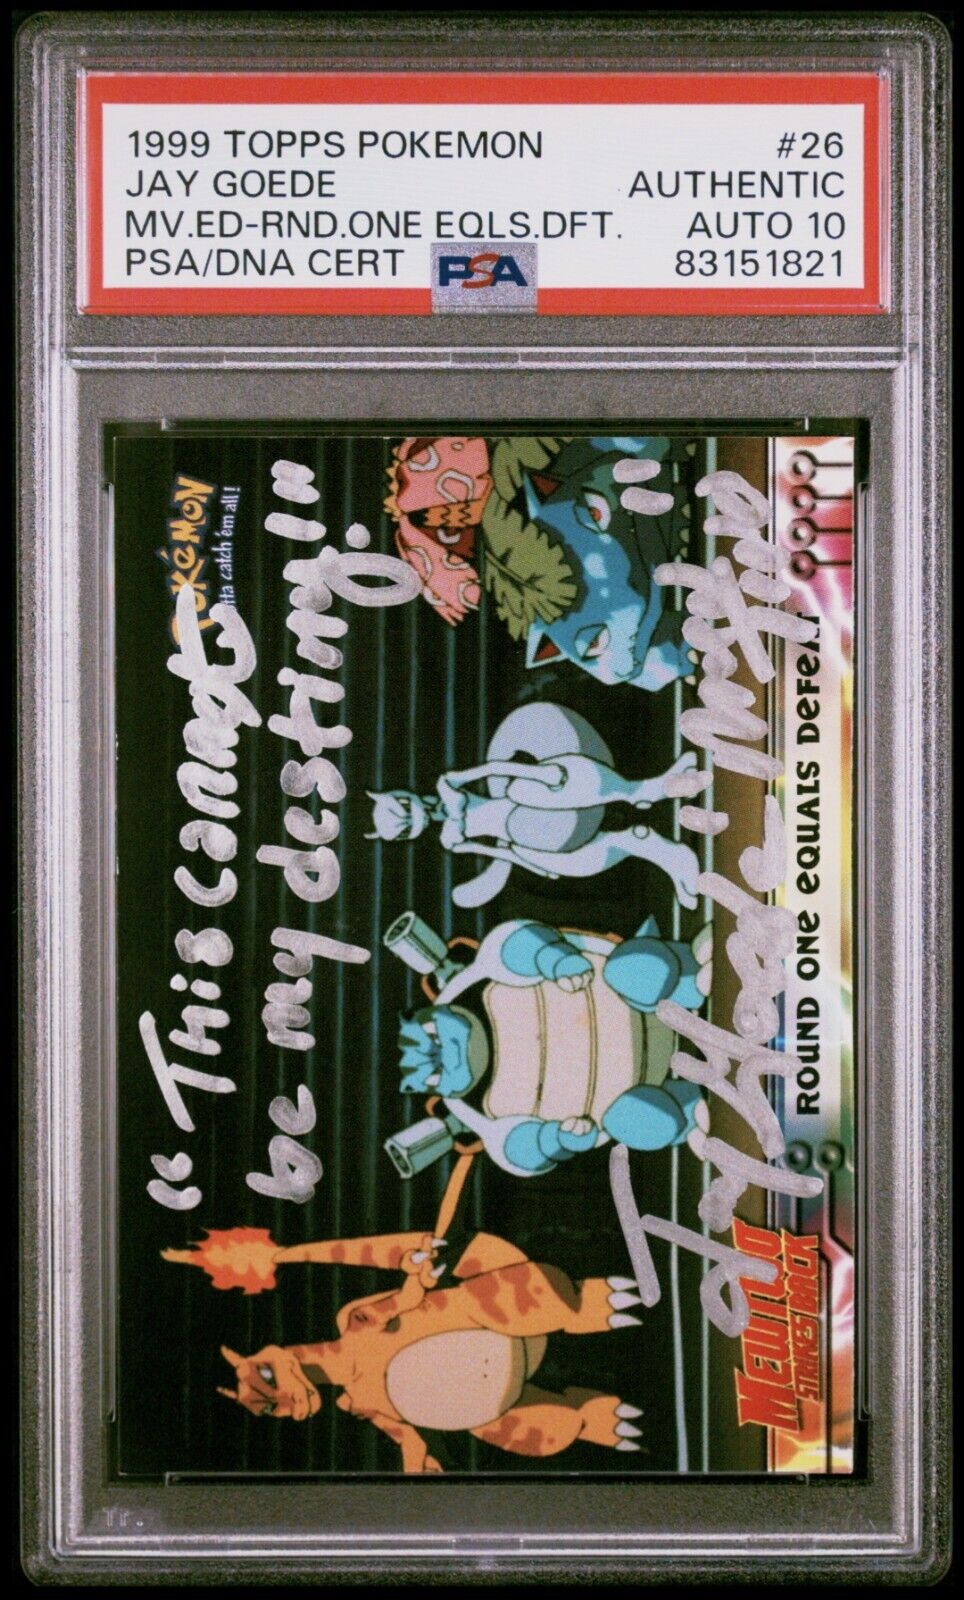 1999 Topps Pokemon Mewtwo Strikes Back Signed Jay Goede (Mewtwo Voice Actor)